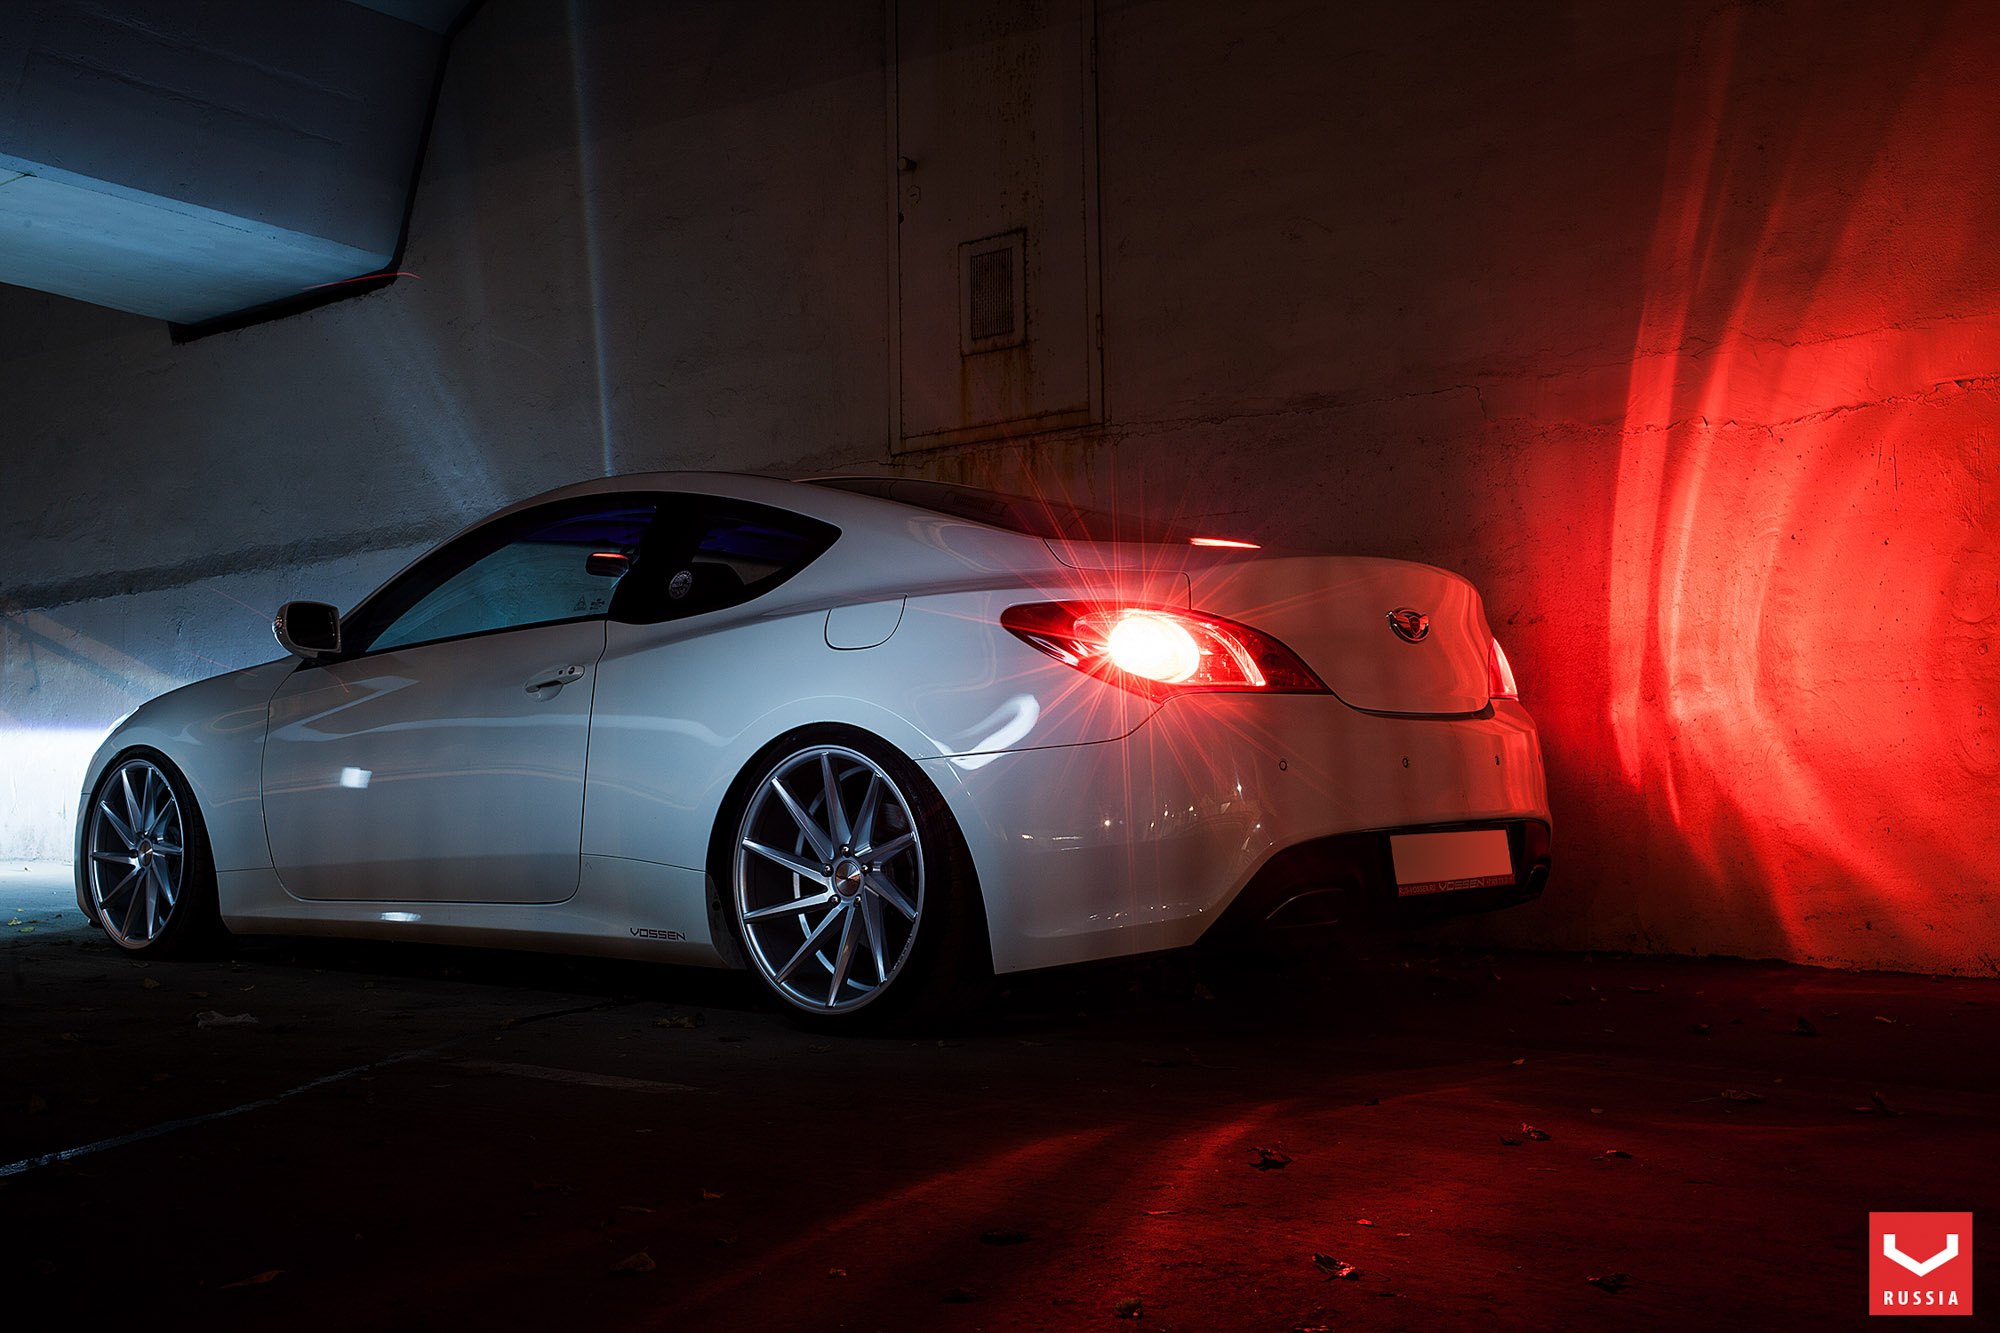 Custom Red LED Taillights on Hyundai Genesis Coupe - Photo by Vossen